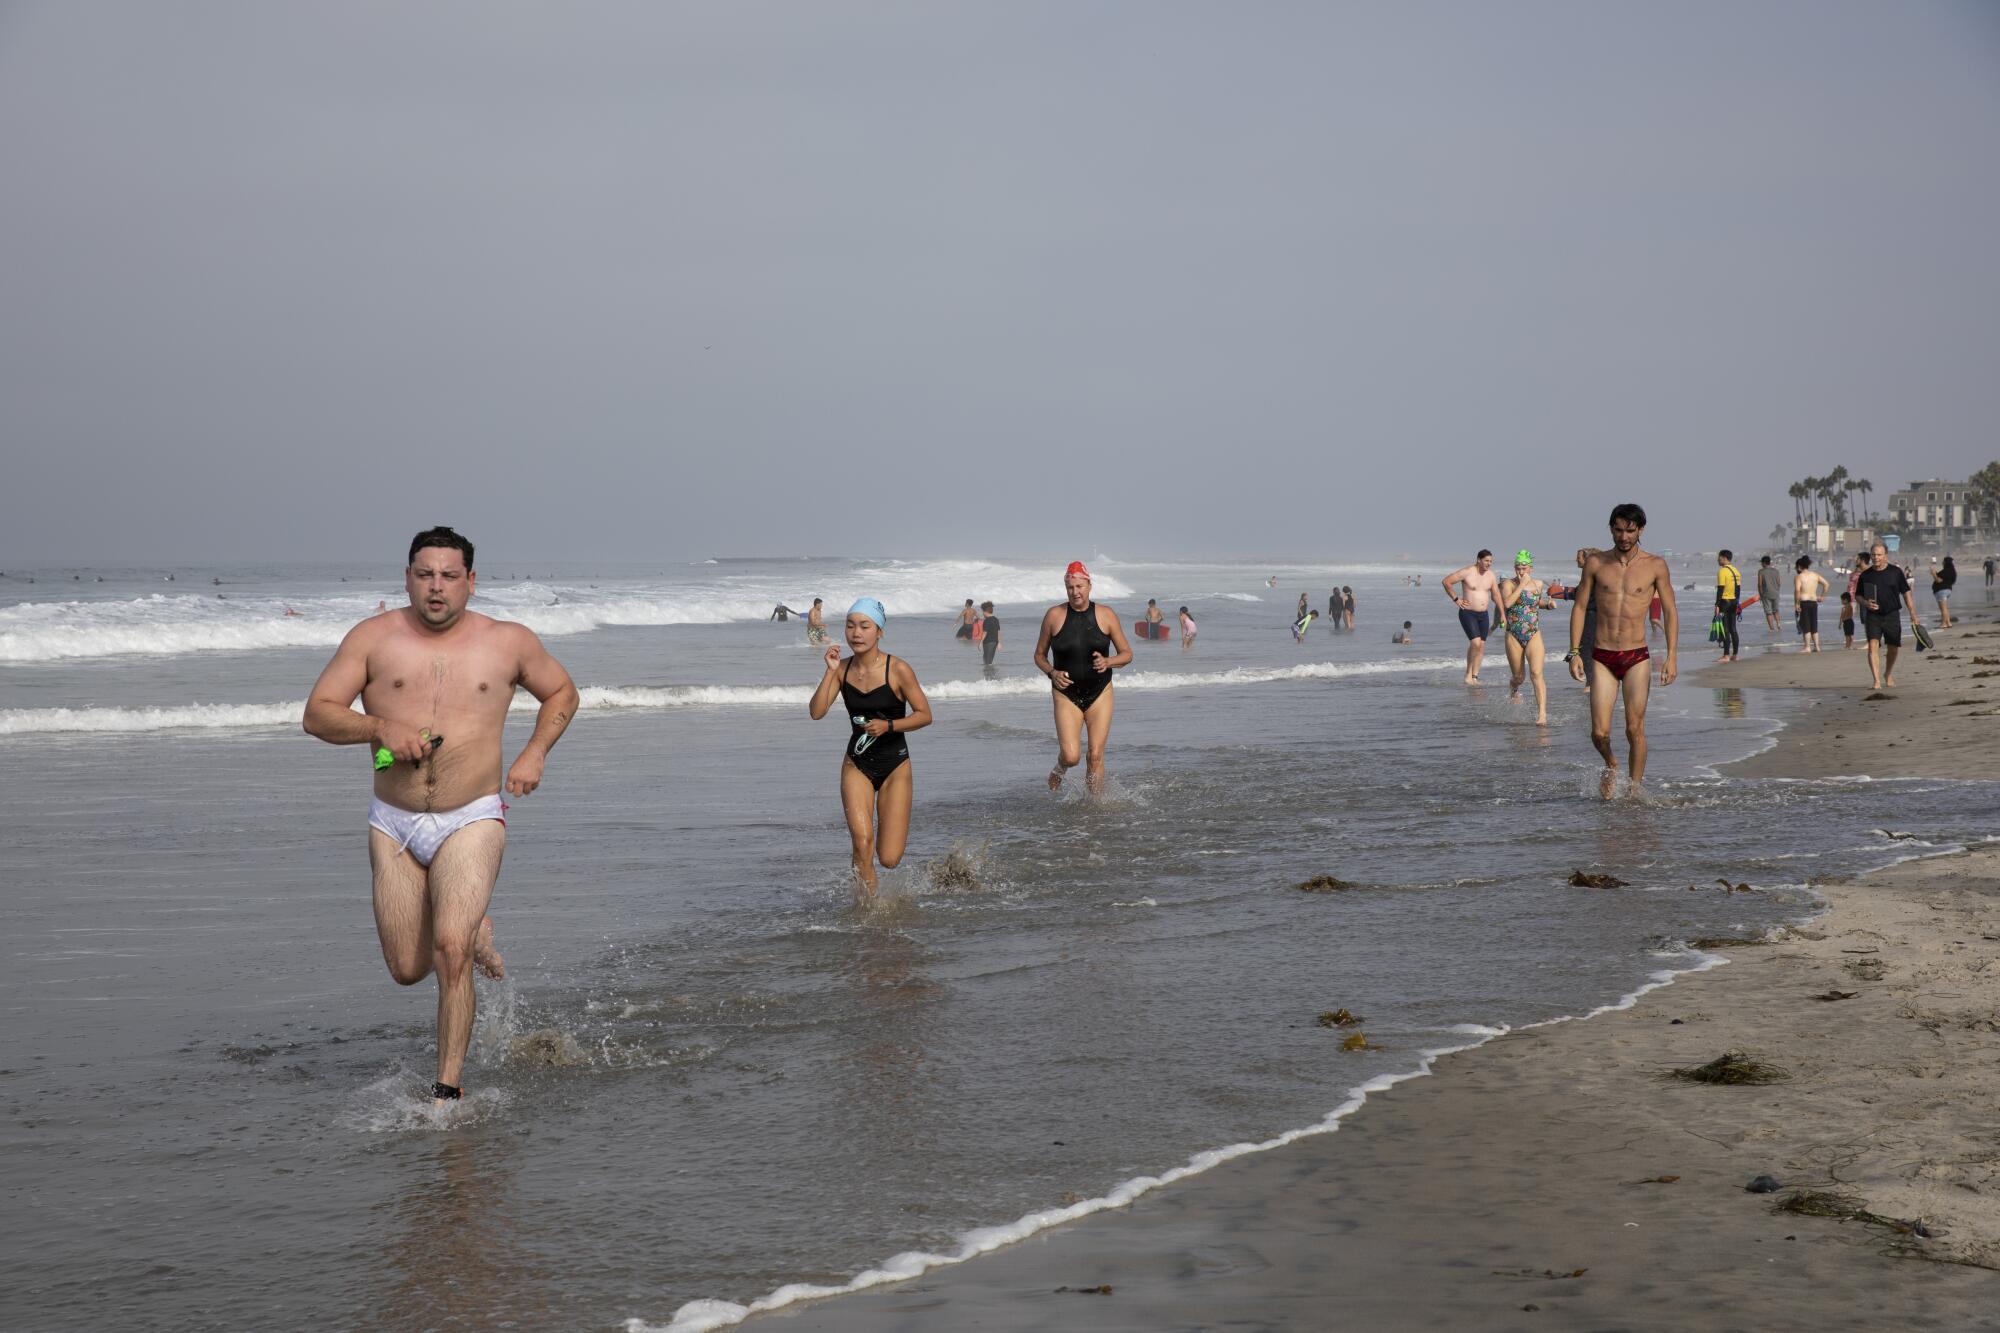 About 450 swimmers plunge into 65 degree water during the Annual Labor Day Pier Swim.